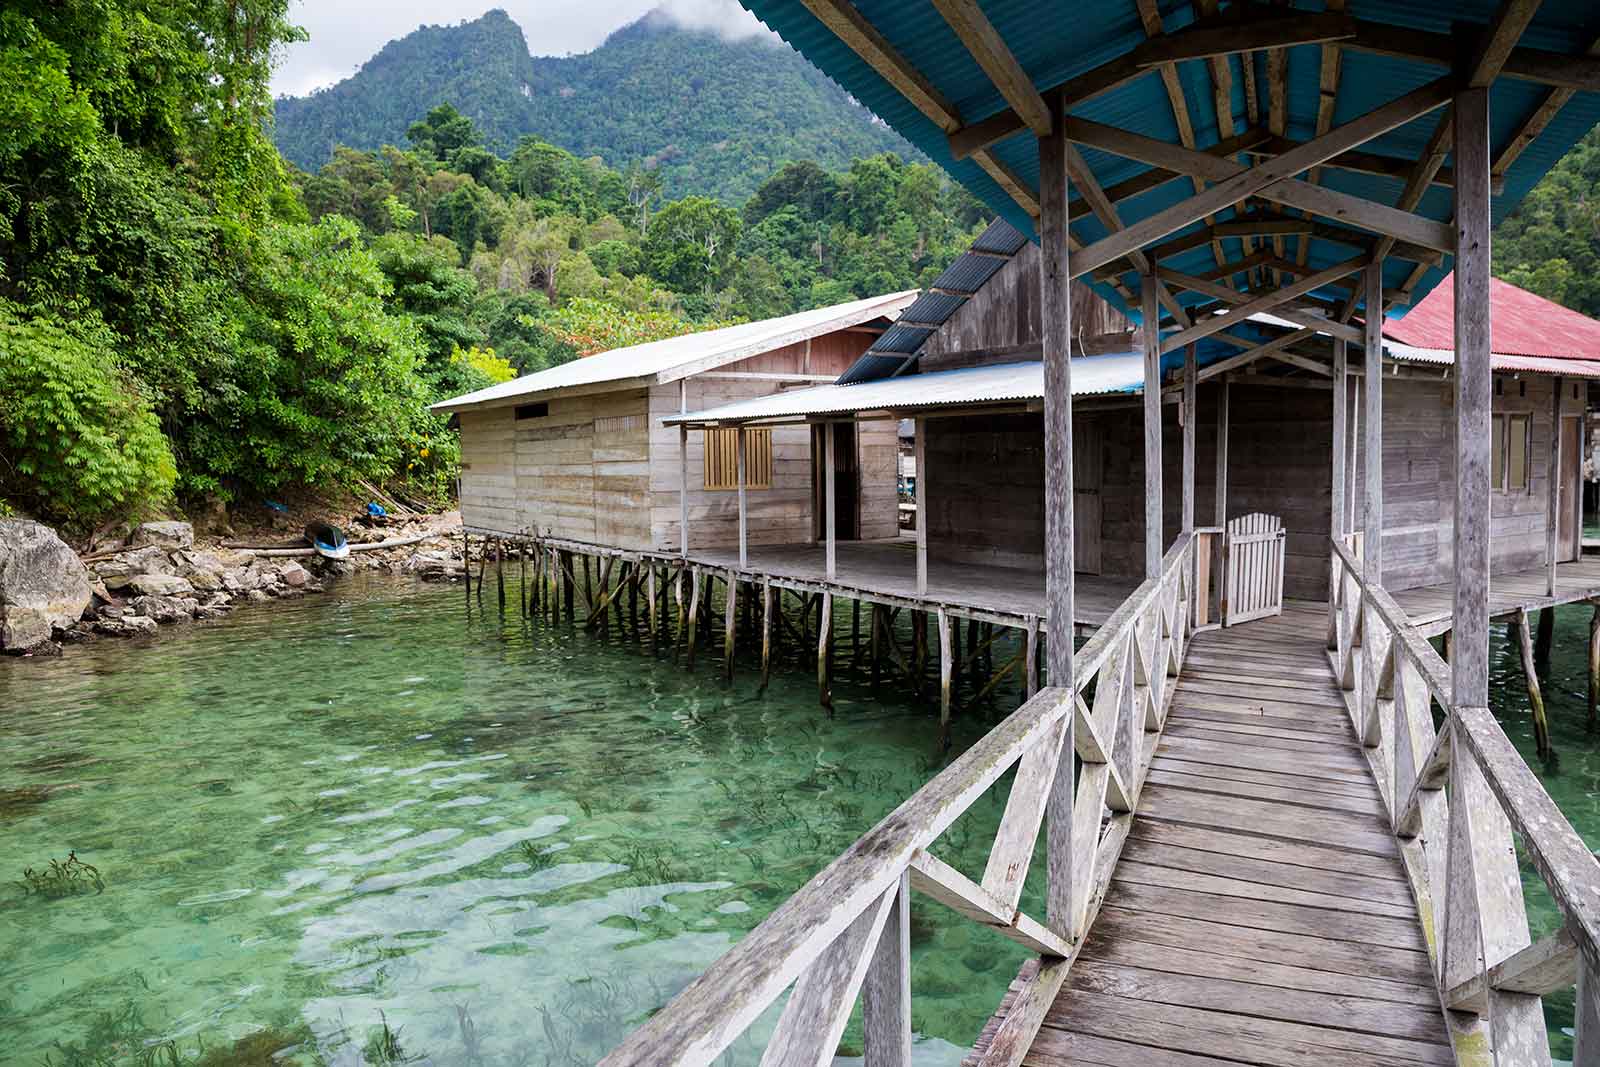 Maluku Islands: Lisar Bahari Resort in Sawai is definitely the place to stay at. You might not have sand beaches here, but you can jump into the crystal clear water straight from your room, which is not too bad if you ask me.